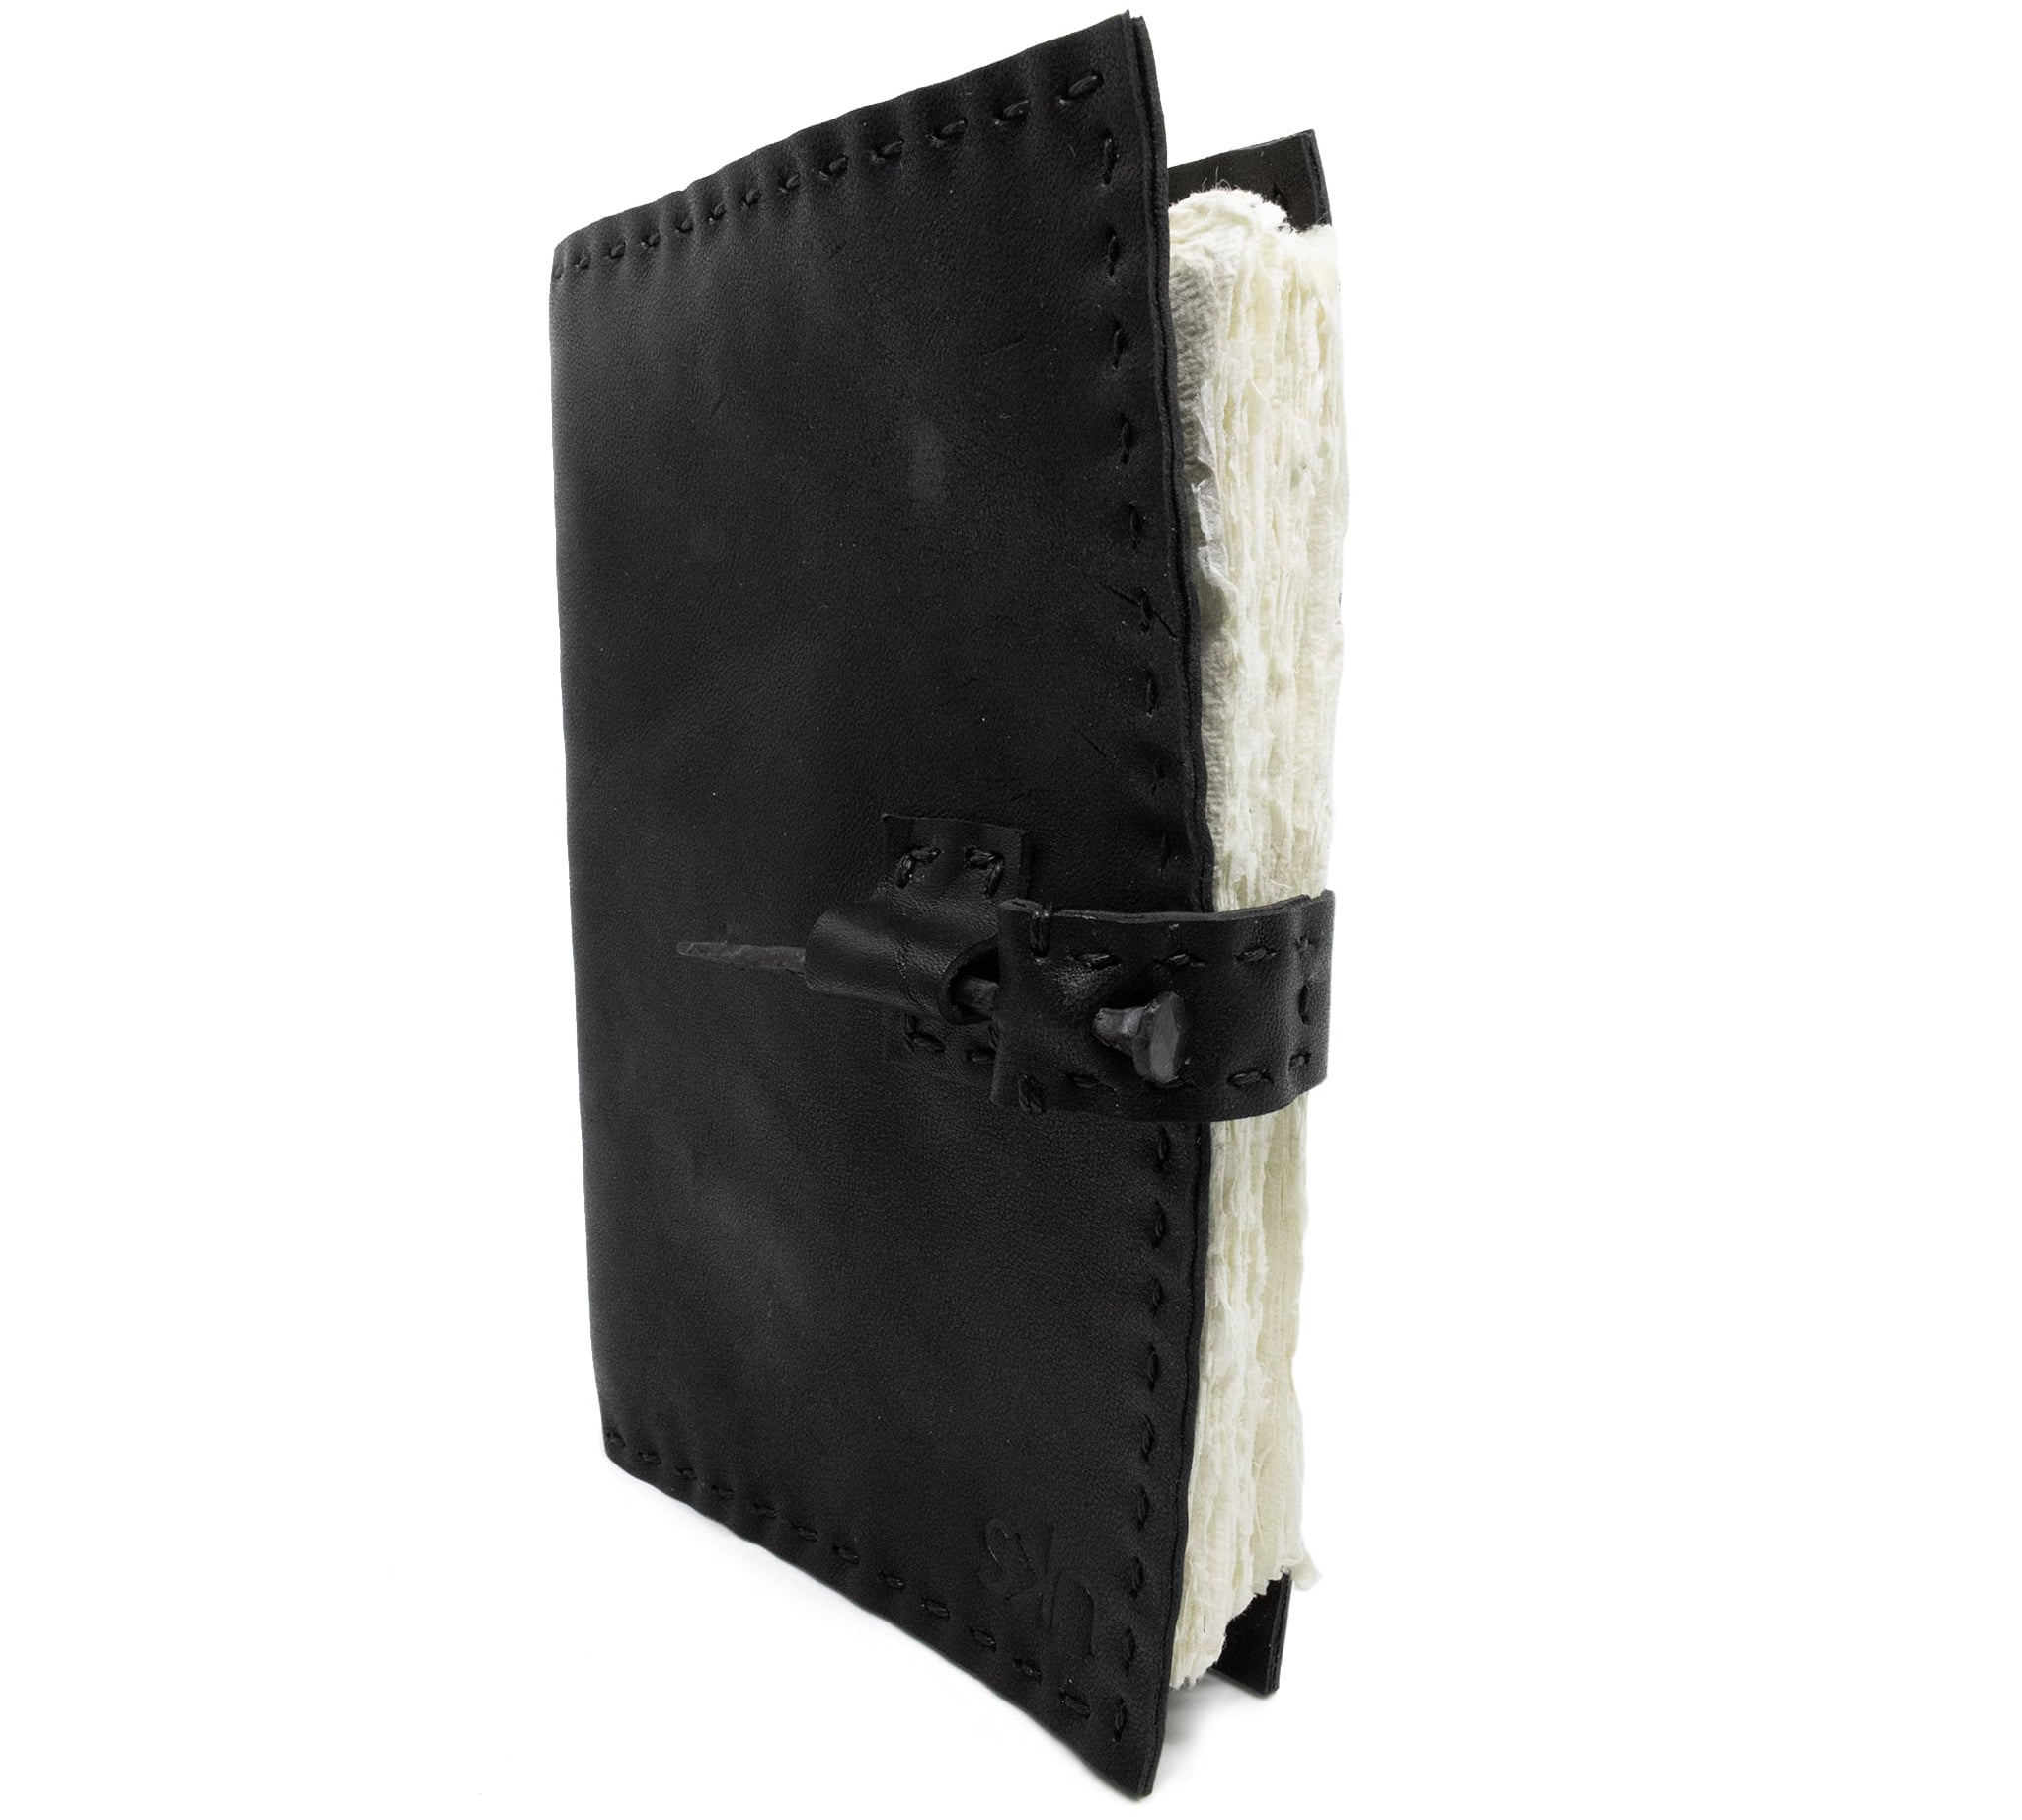 Hand sewn luxury leather journals and diaries available online at atelier skn.